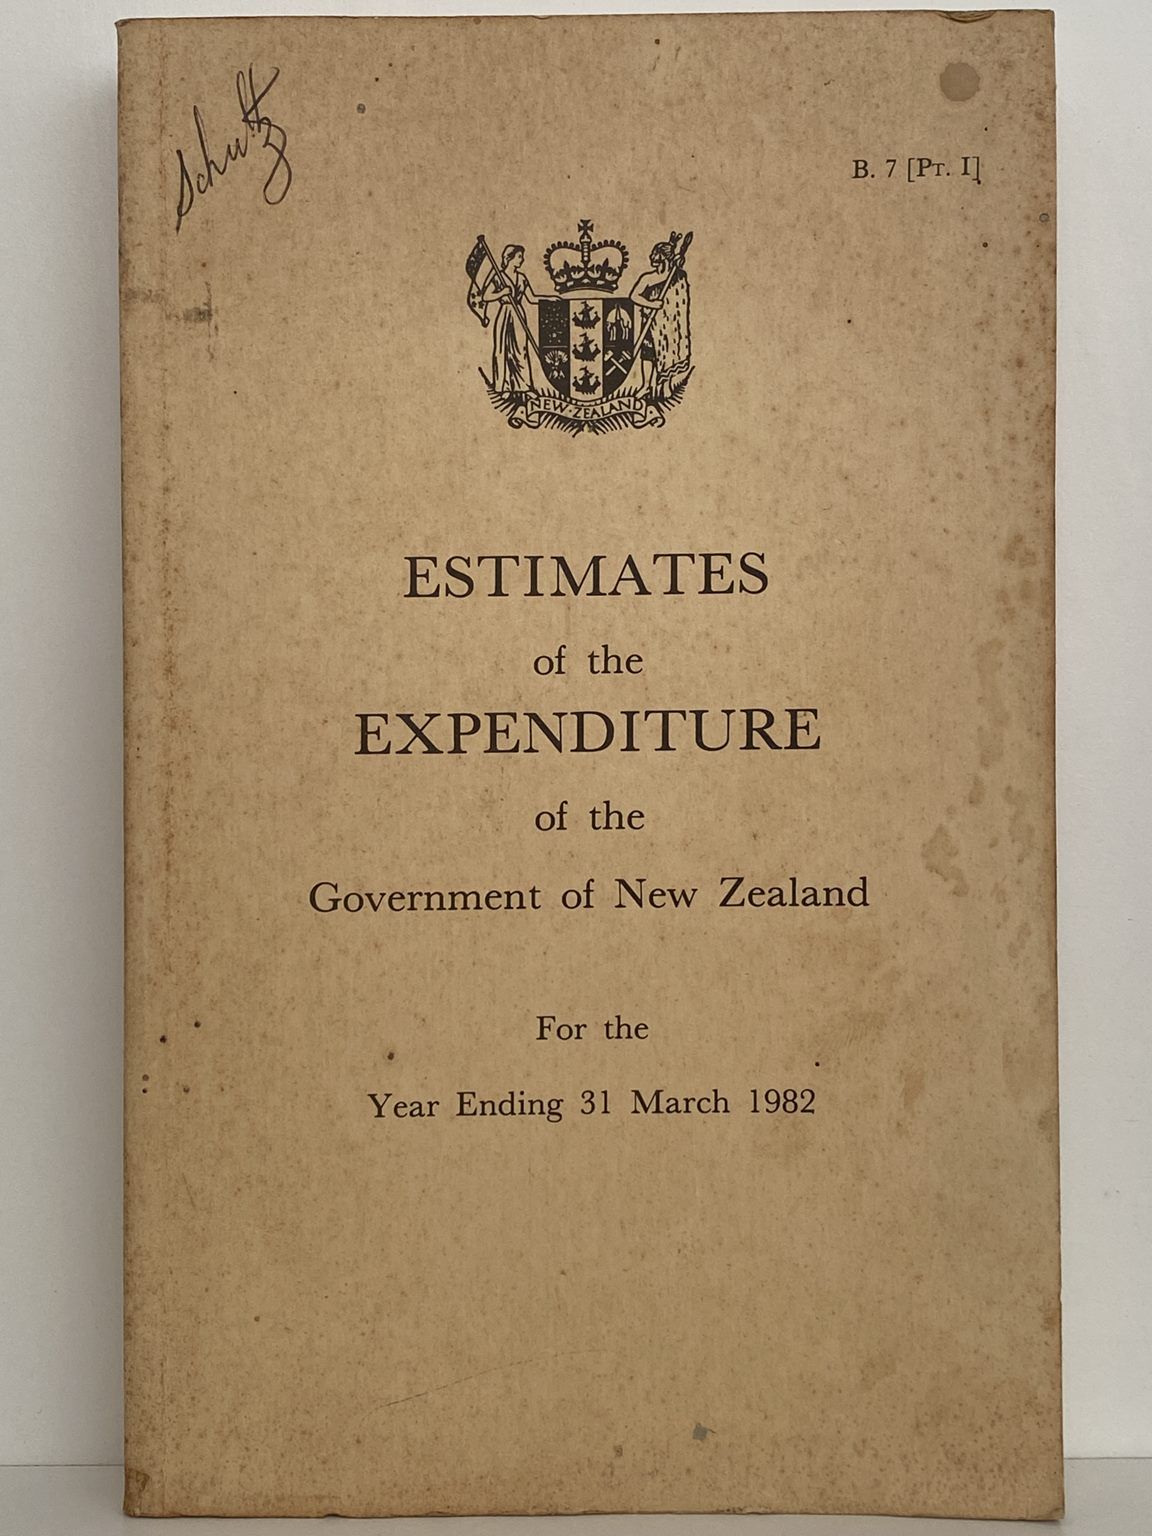 ESTIMATES of the EXPENDITURE of the GOVERMENT of NEW ZEALAND March 1982